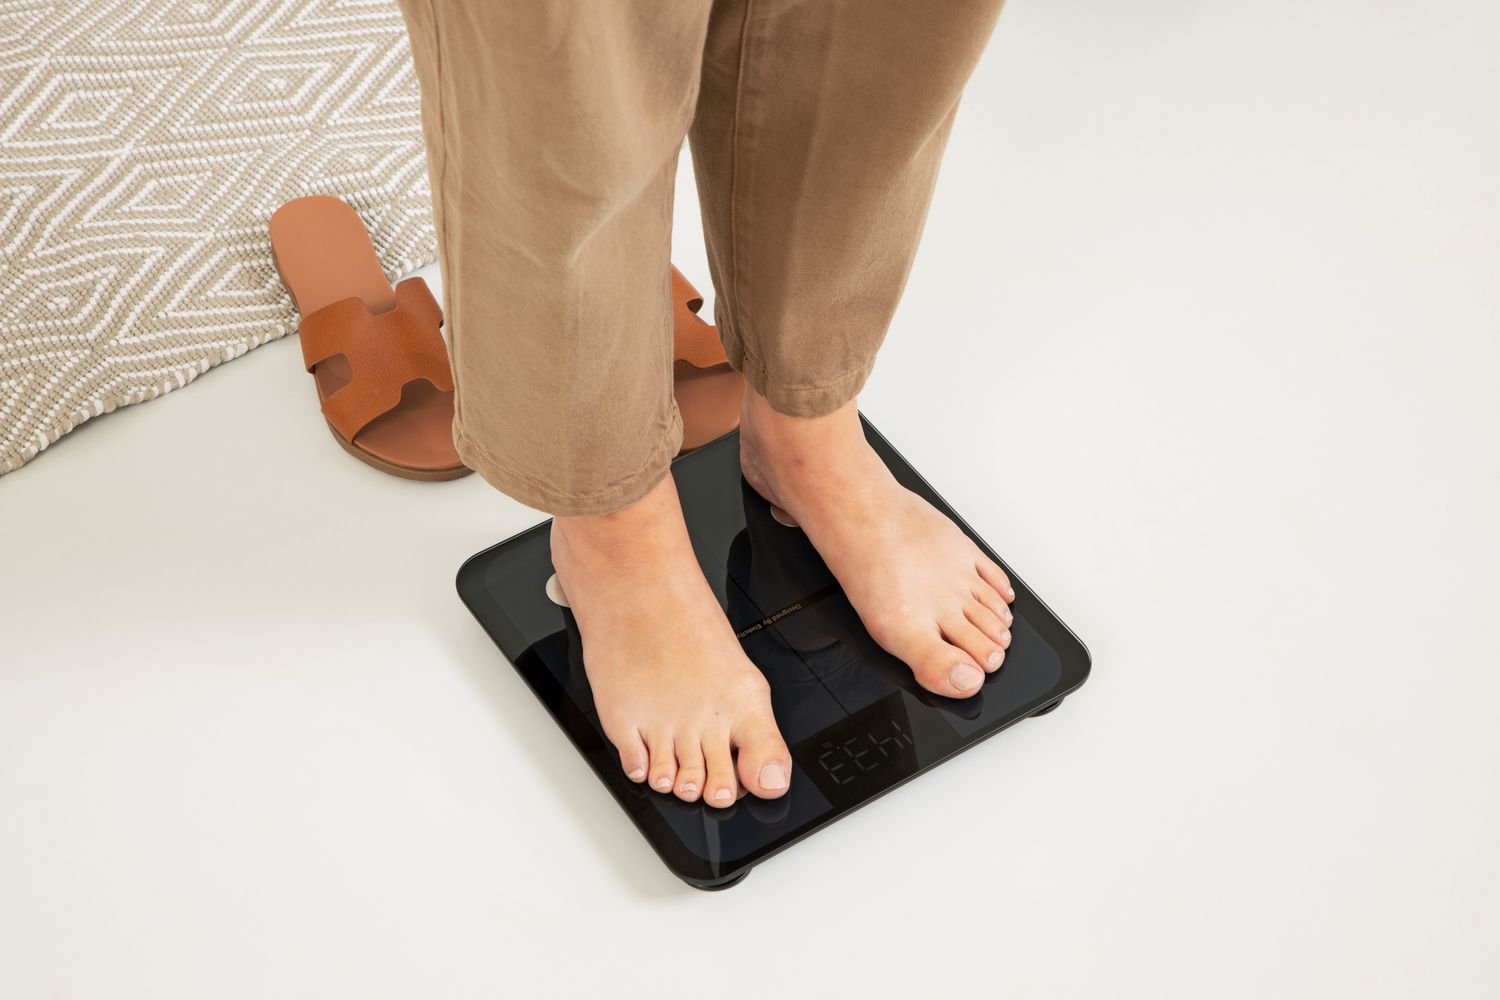 What Is The Best Body Weight Scale